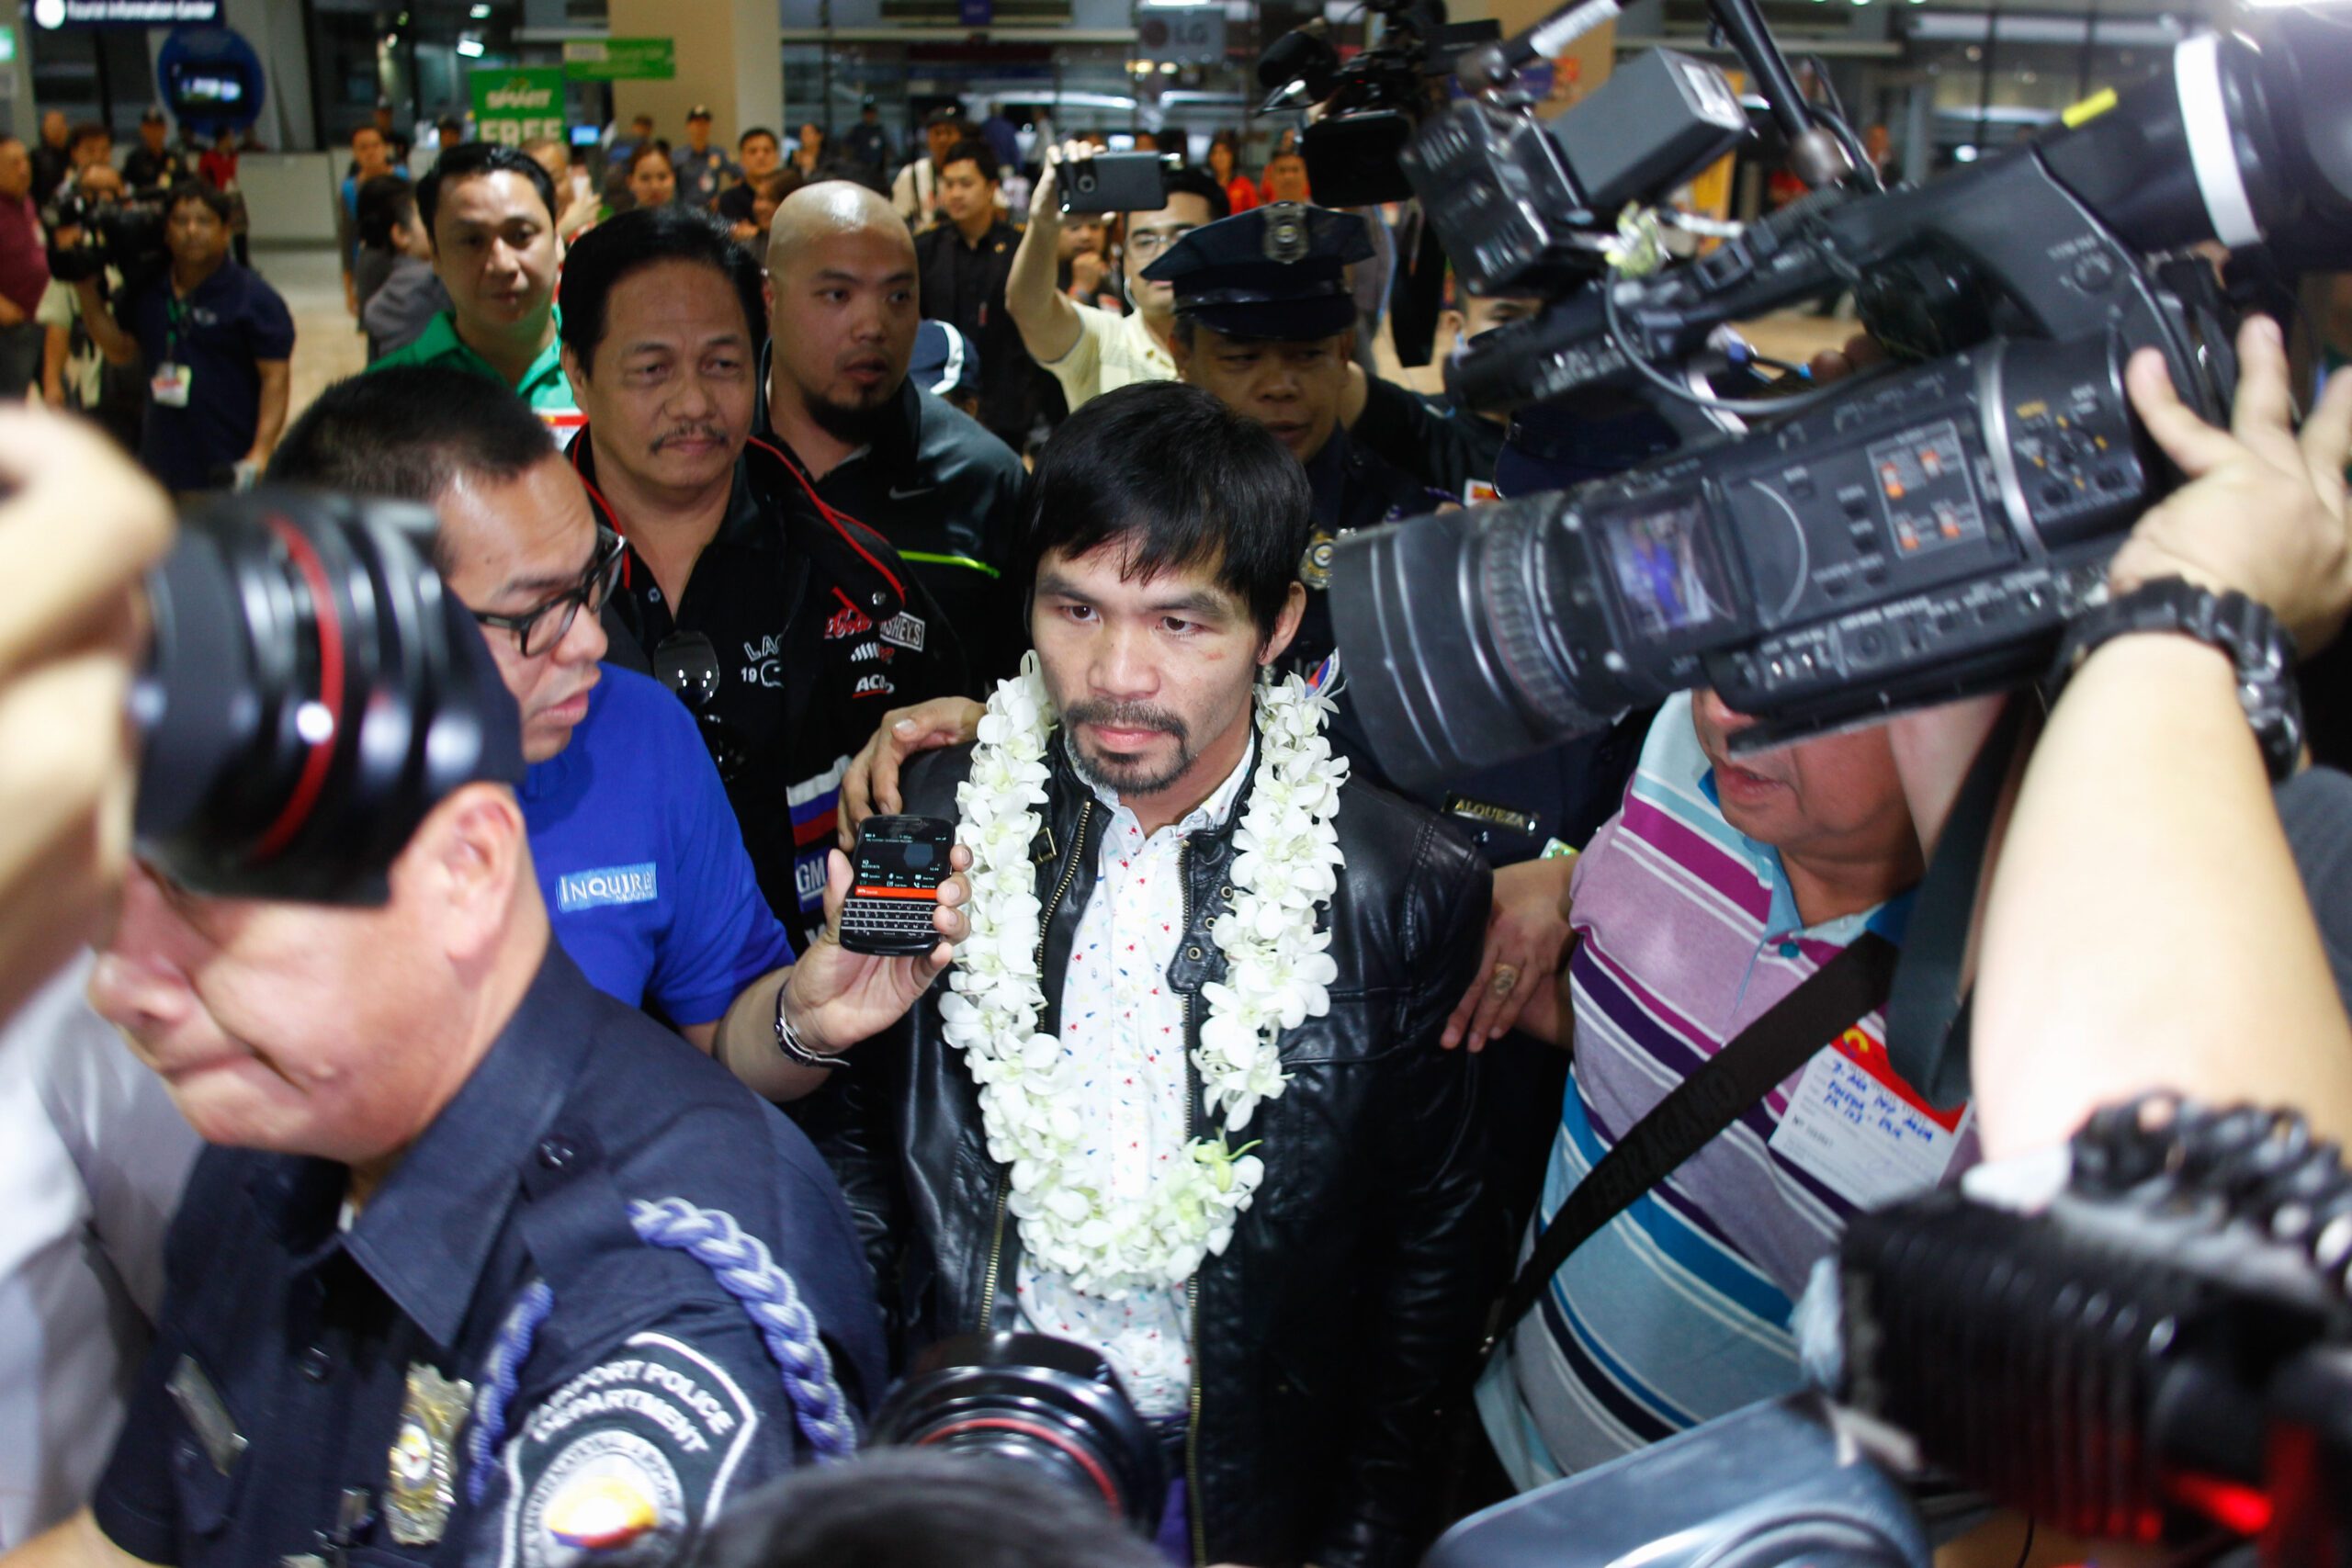 IN PHOTOS: Manny Pacquiao returns home after Bradley win